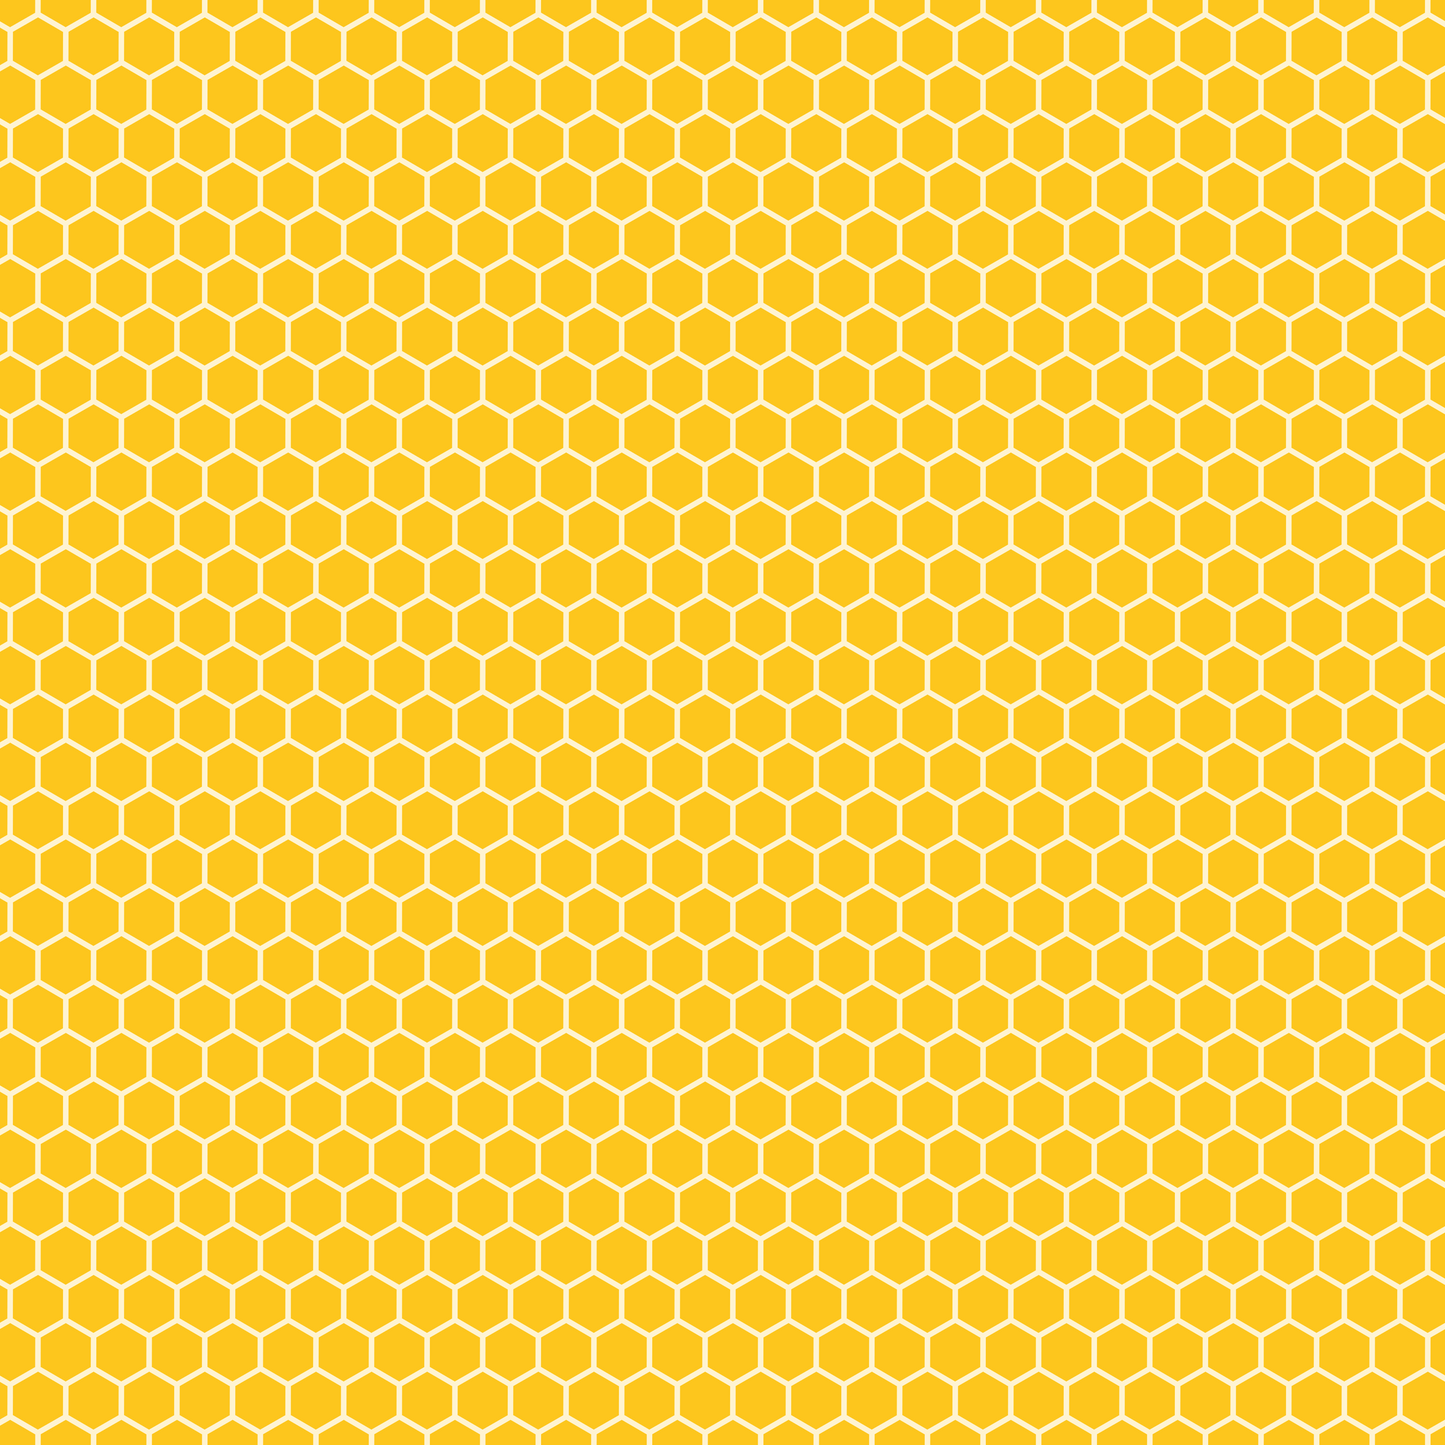 Honeycomb (Faux Leather - 8" x 13" Printed Sheet)